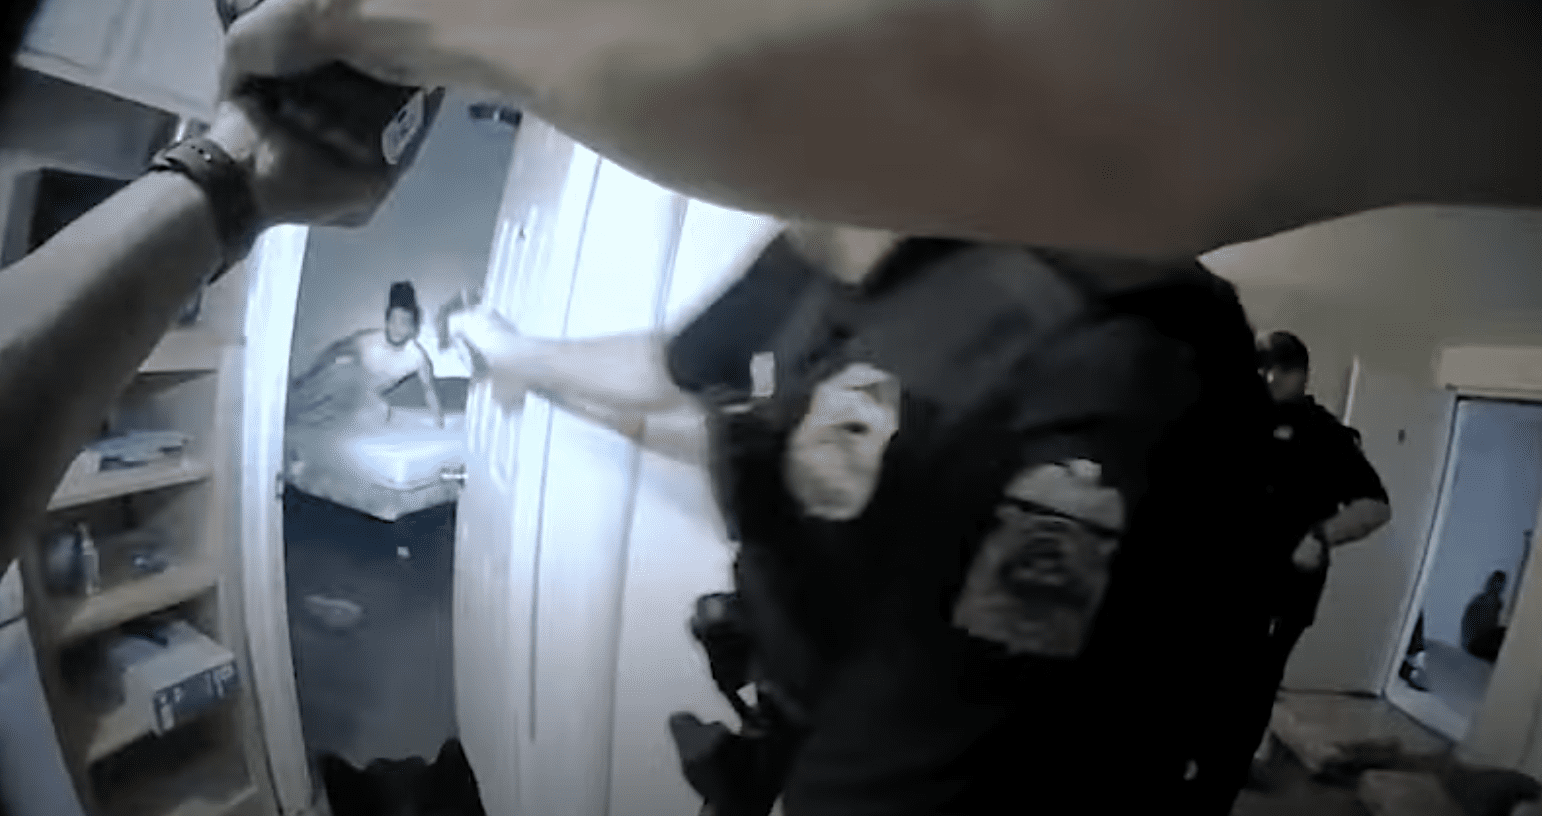 Black man fatally shot by White officer during attempted arrest (video)